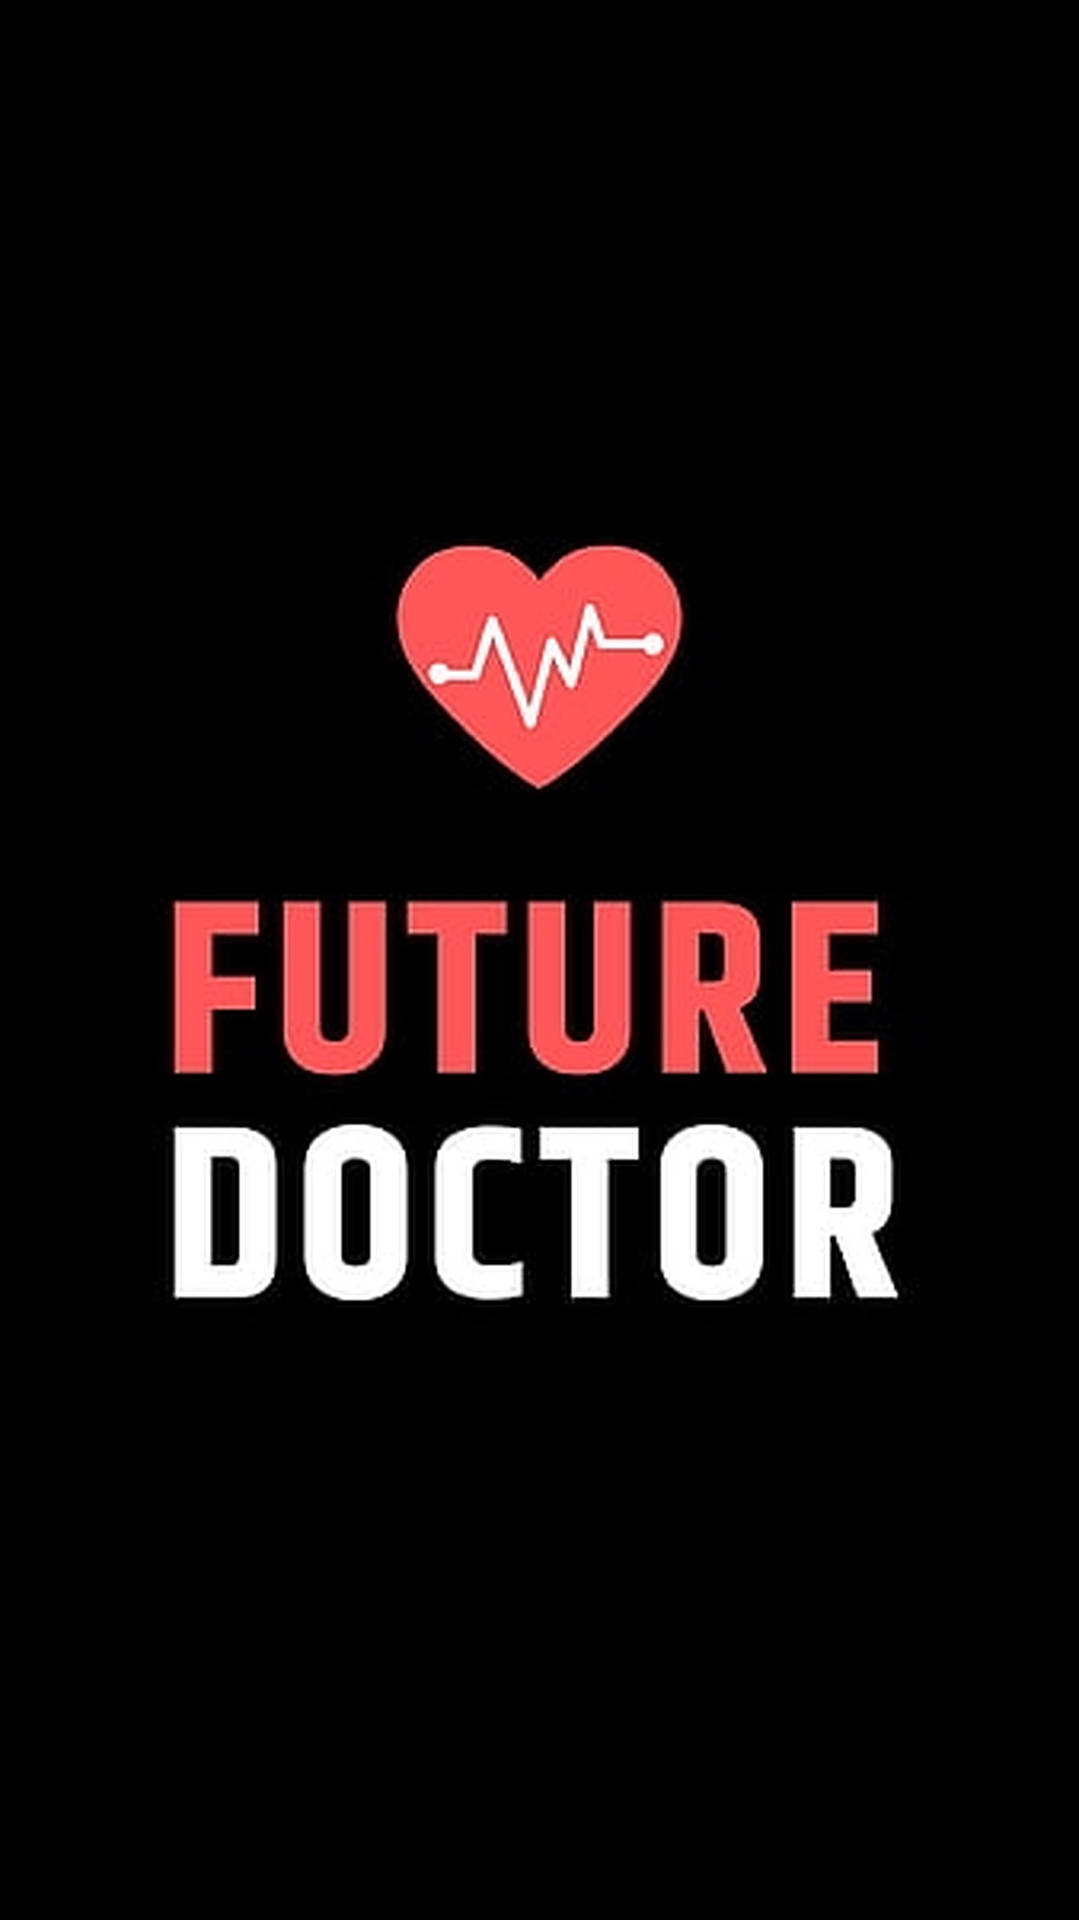 Future Doctor With Heartbeat Background